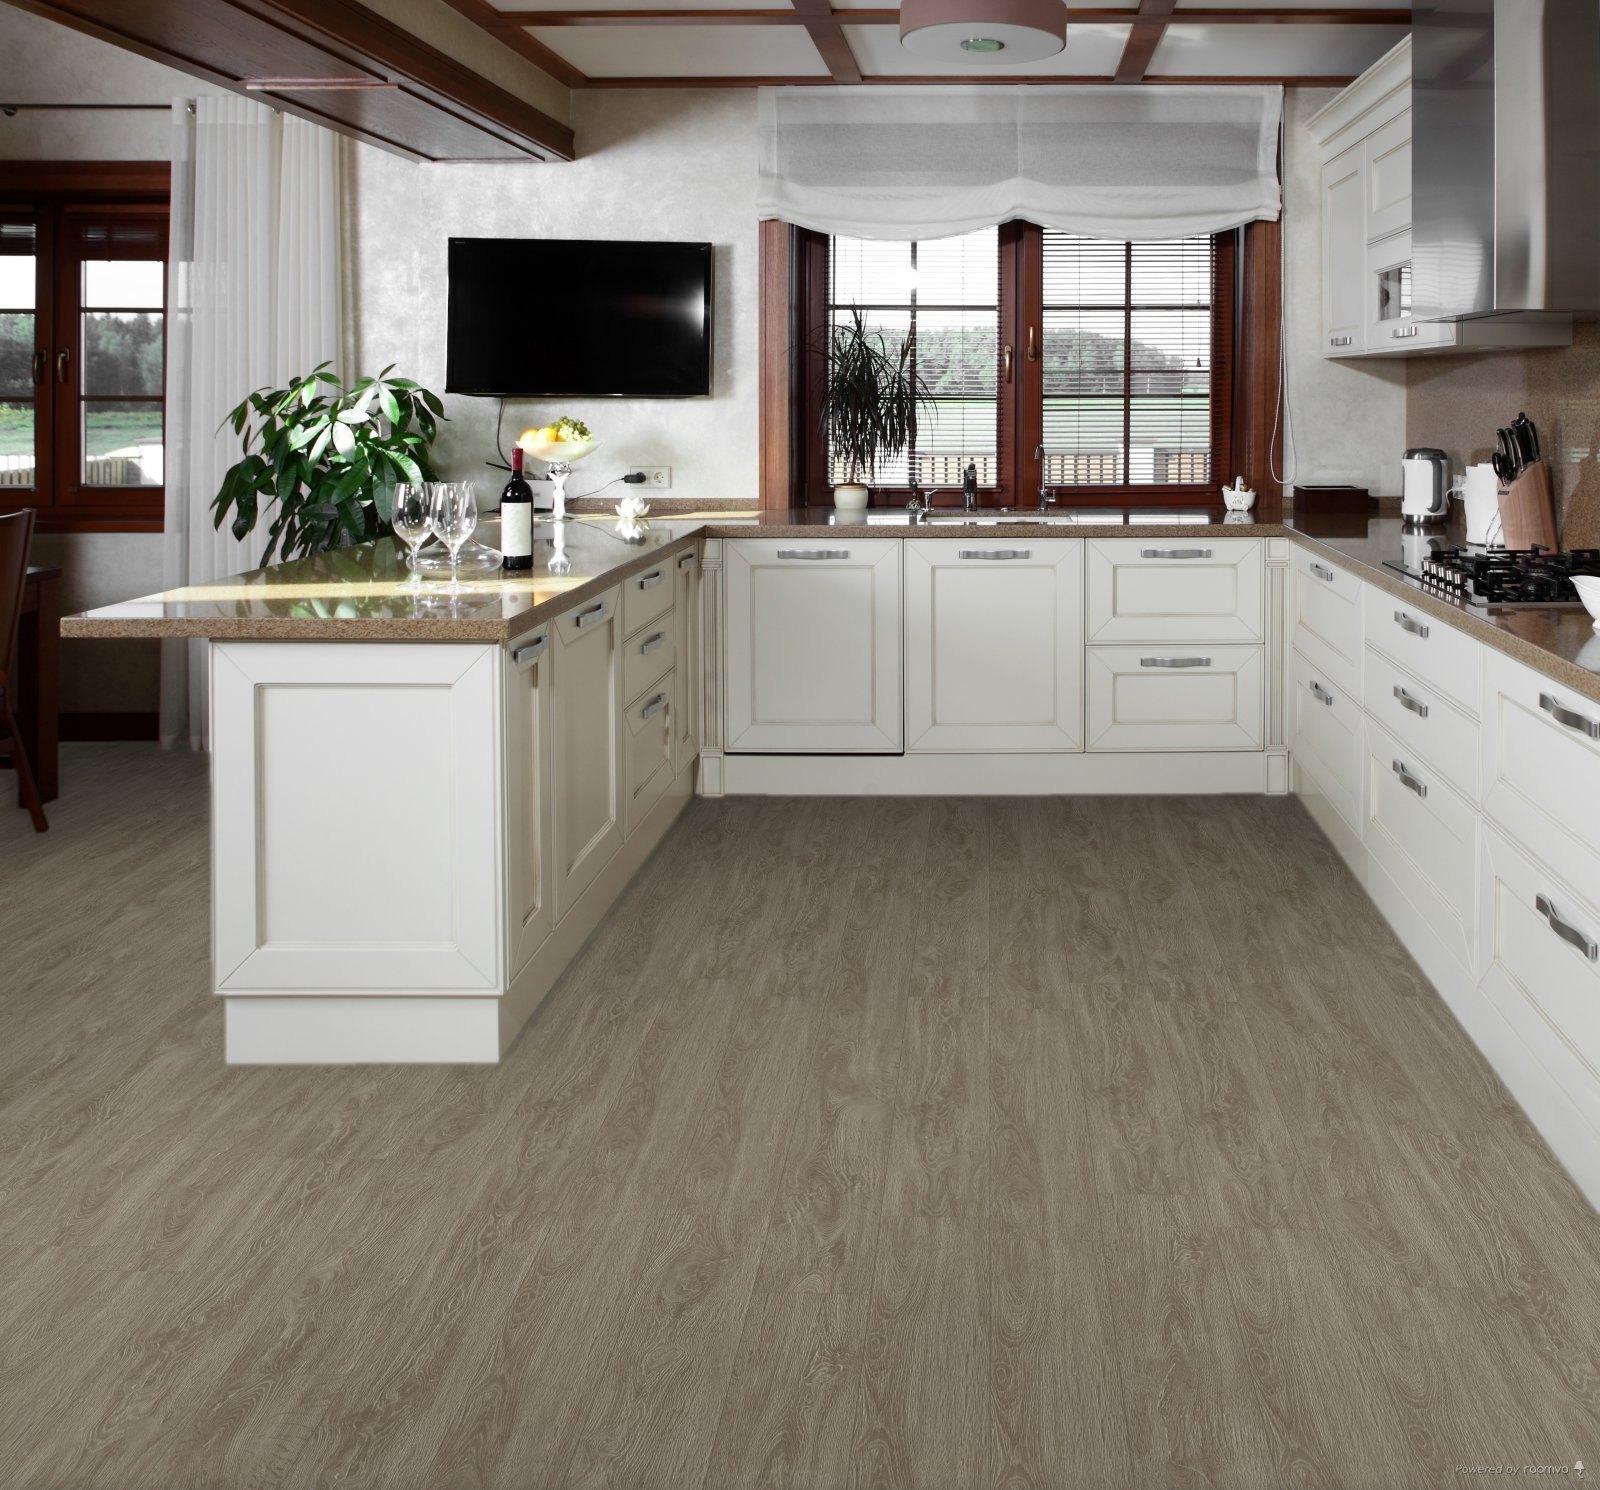 Horizen Flooring presents to you a picture of a quality wide plank Aspen luxury vinyl plank. NovoCore Premium EIR collection features a wide range of colors & designs that will compliment any interior. Natural wood grain synchronized surface allow for an authentic hardwood look & feel. This collection features a 0.25″ / 6.5 mm overall thickness and a durable 22 mil / 0.55 mm wear layer for residential and commercial applications.